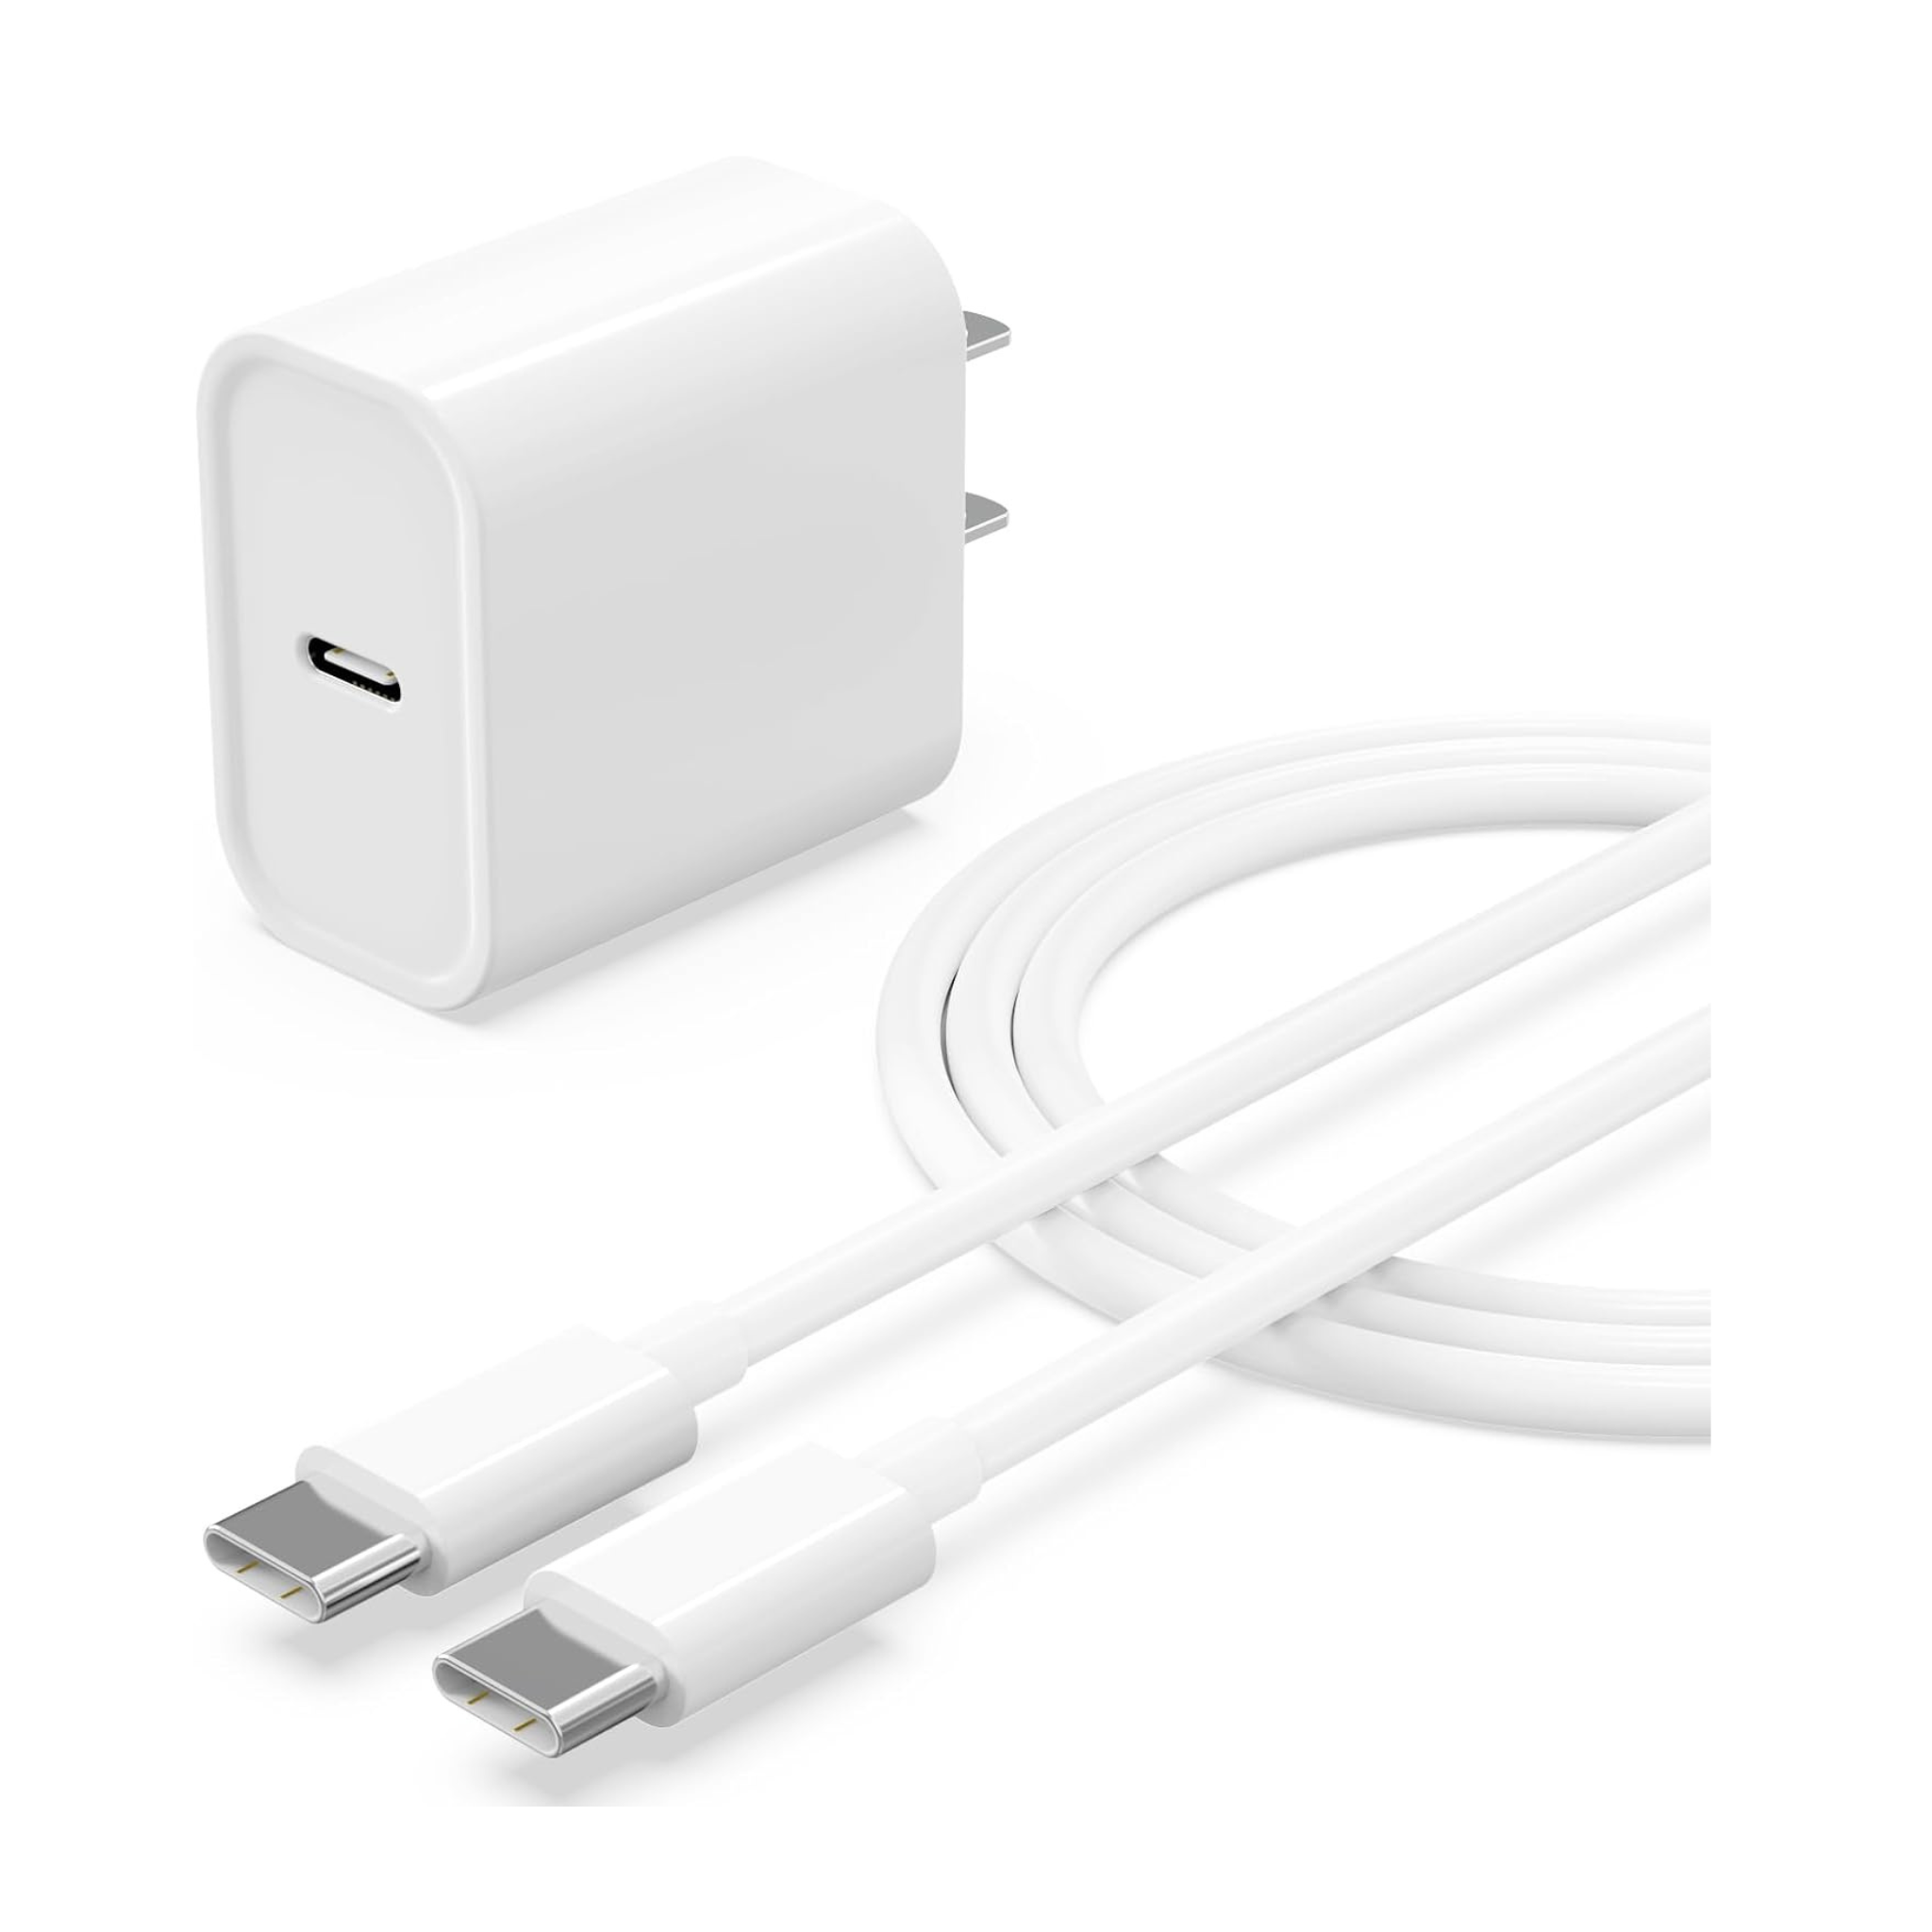 Akszri 20W USB-C Wall Charger Block W/ 6Ft USB-C To C Cable